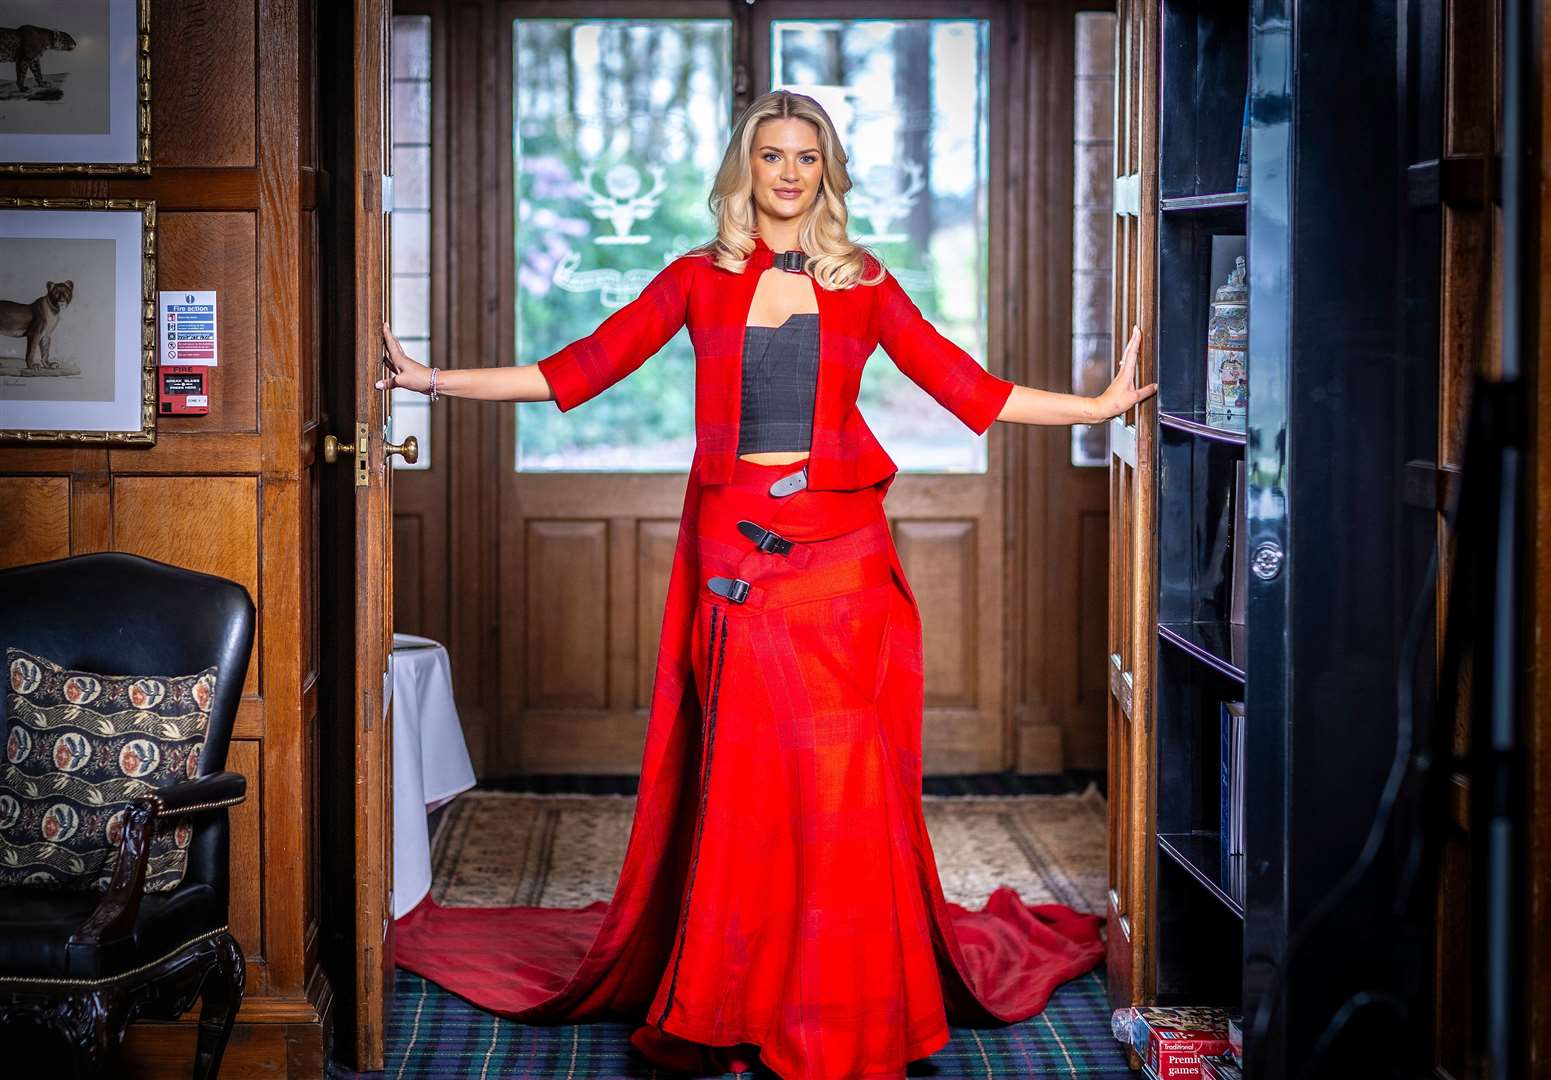 Chelsie Allison during her photoshoot at Kincraig Castle Hotel. Picture: Andy Barr Photography